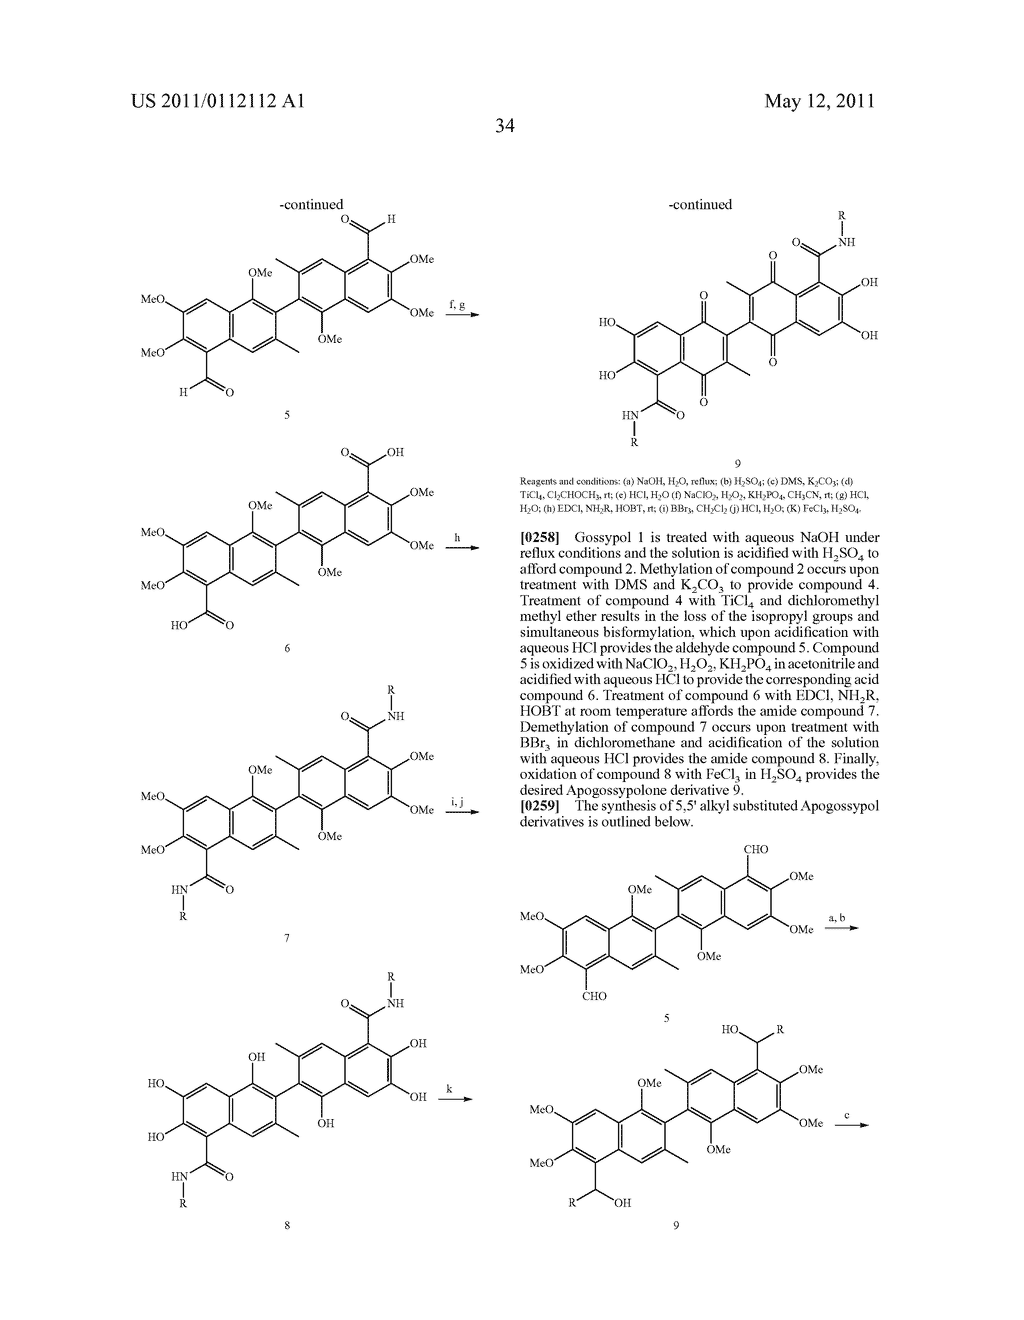 APOGOSSYPOLONE DERIVATIVES AS ANTICANCER AGENTS - diagram, schematic, and image 60